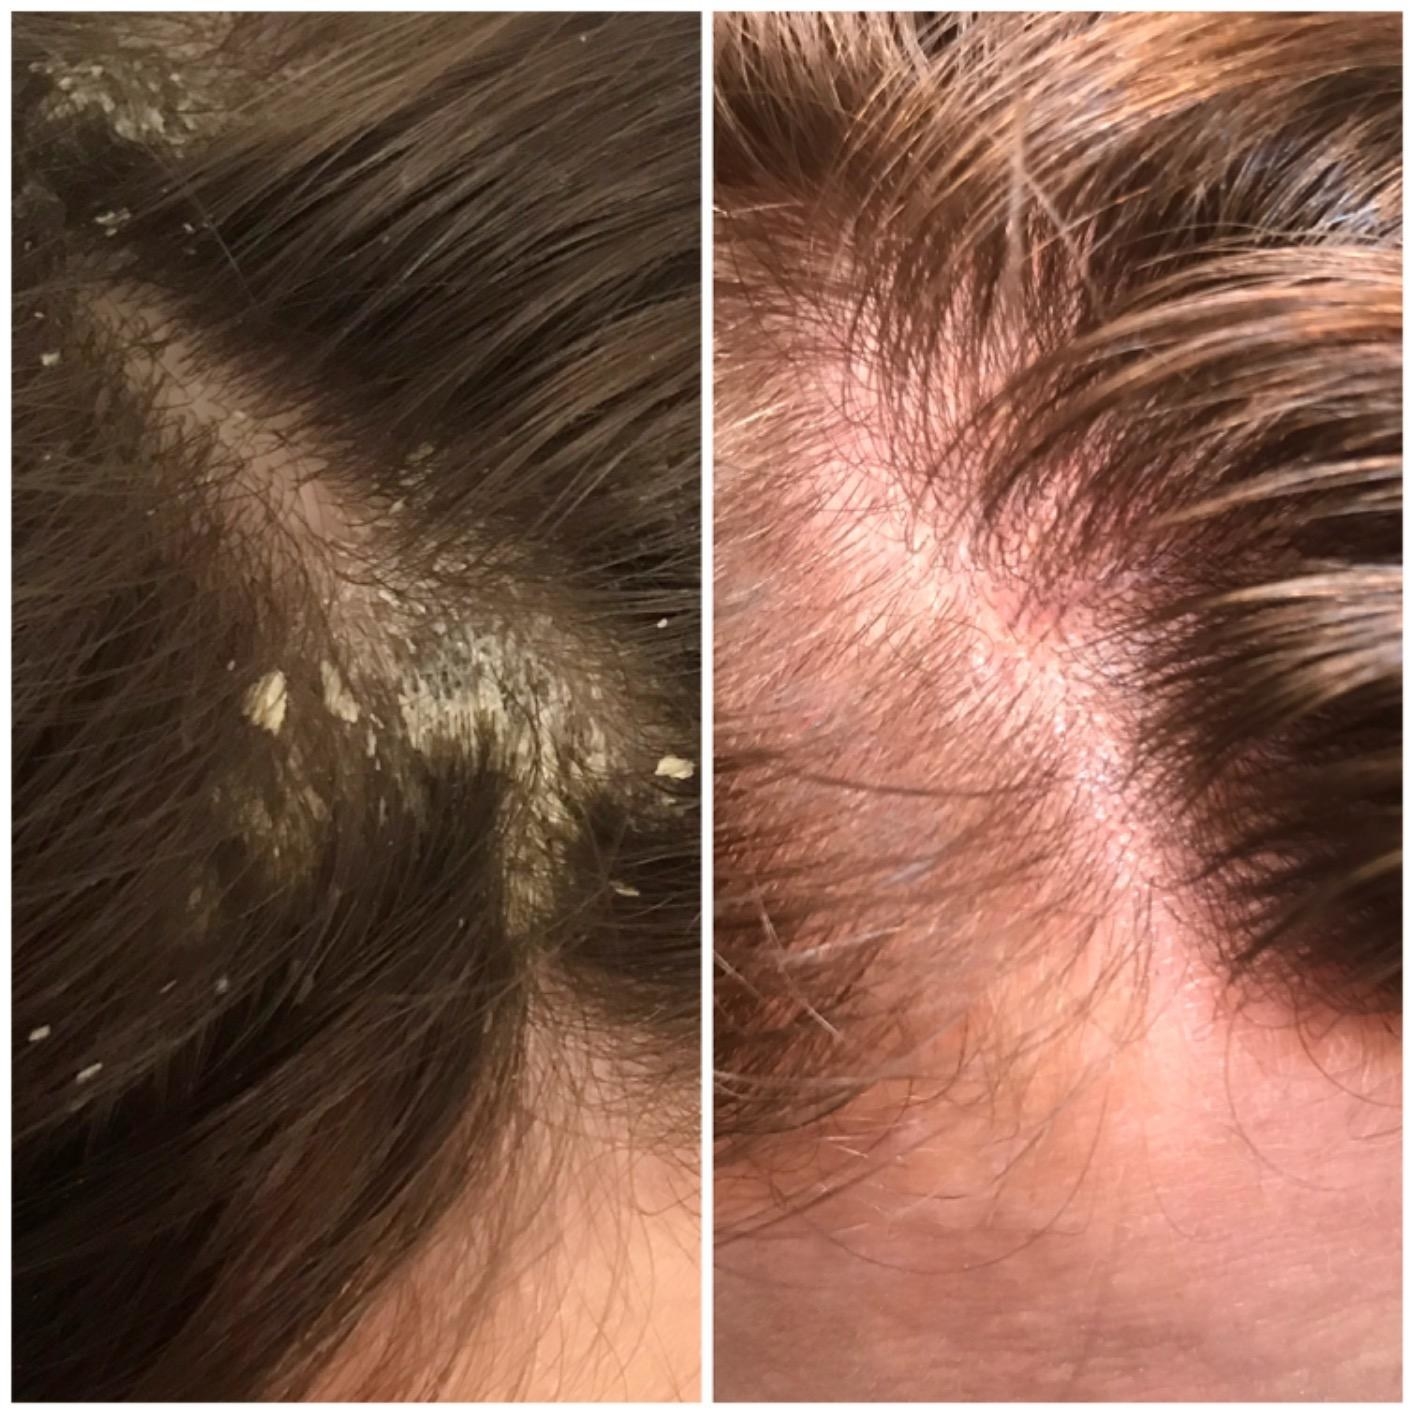 on the left a reviewer&#x27;s scalp with dandruff, on the right the same scalp wiht no dandruff